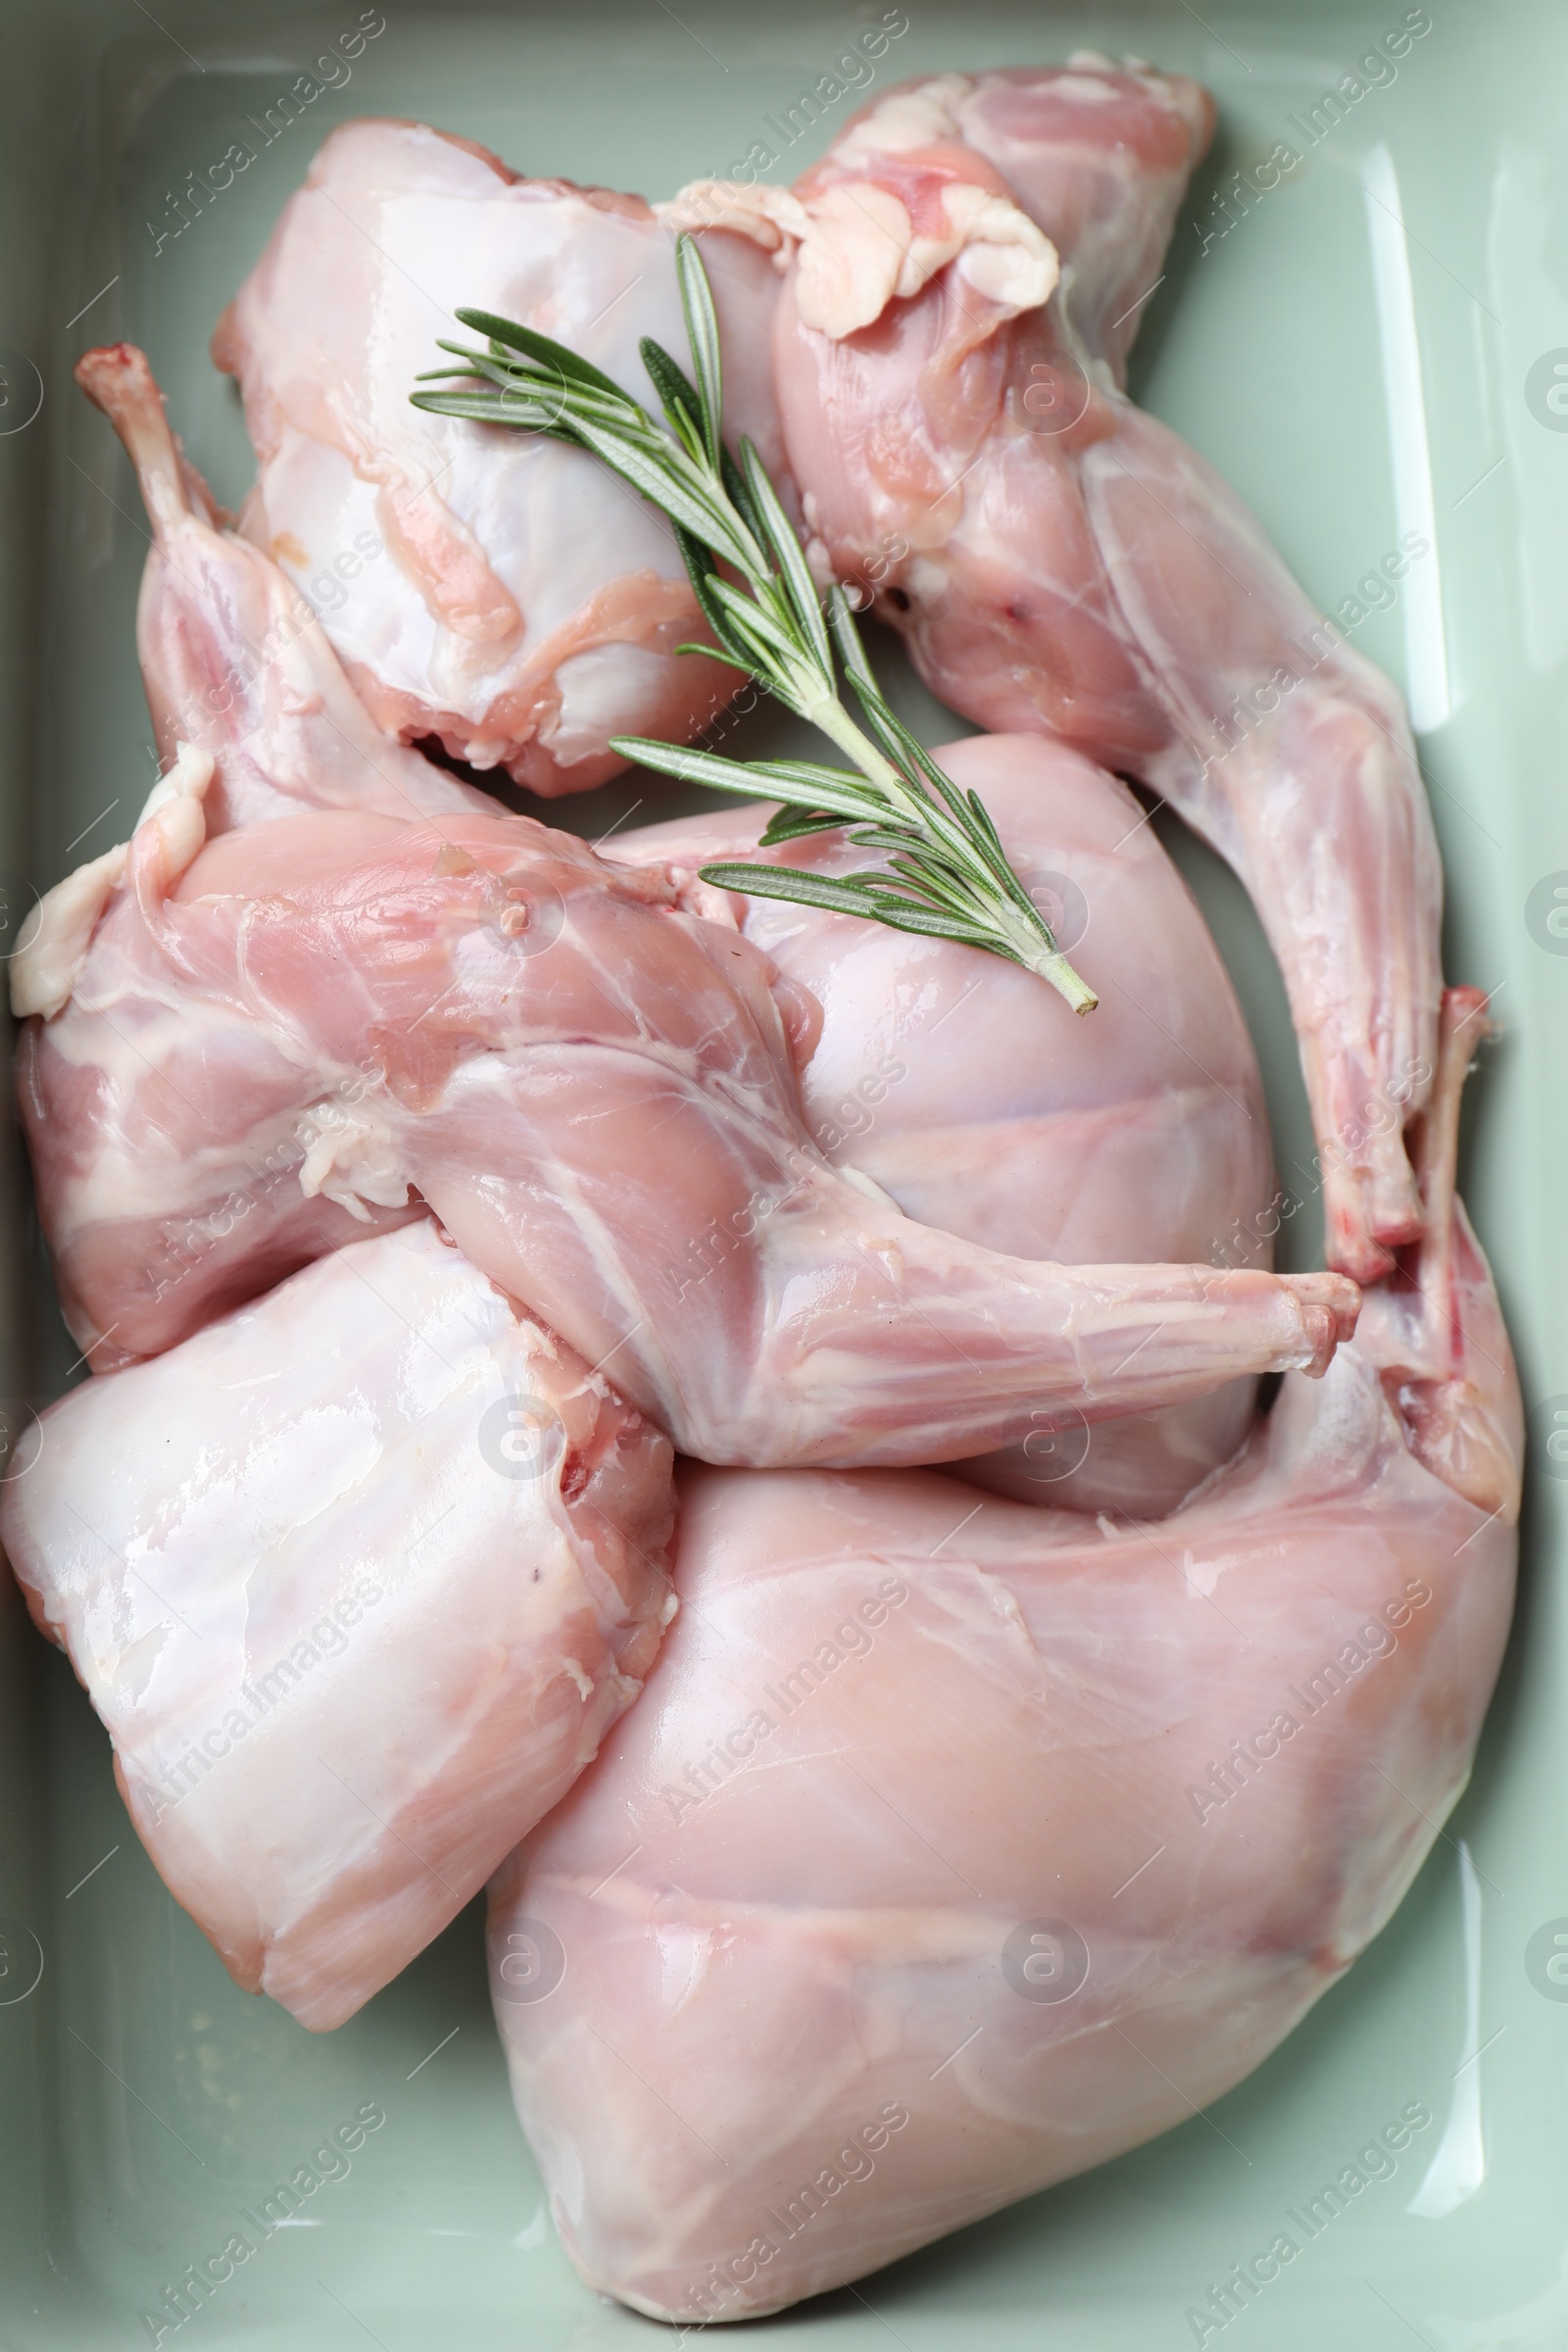 Photo of Raw rabbit meat and rosemary in baking dish, top view